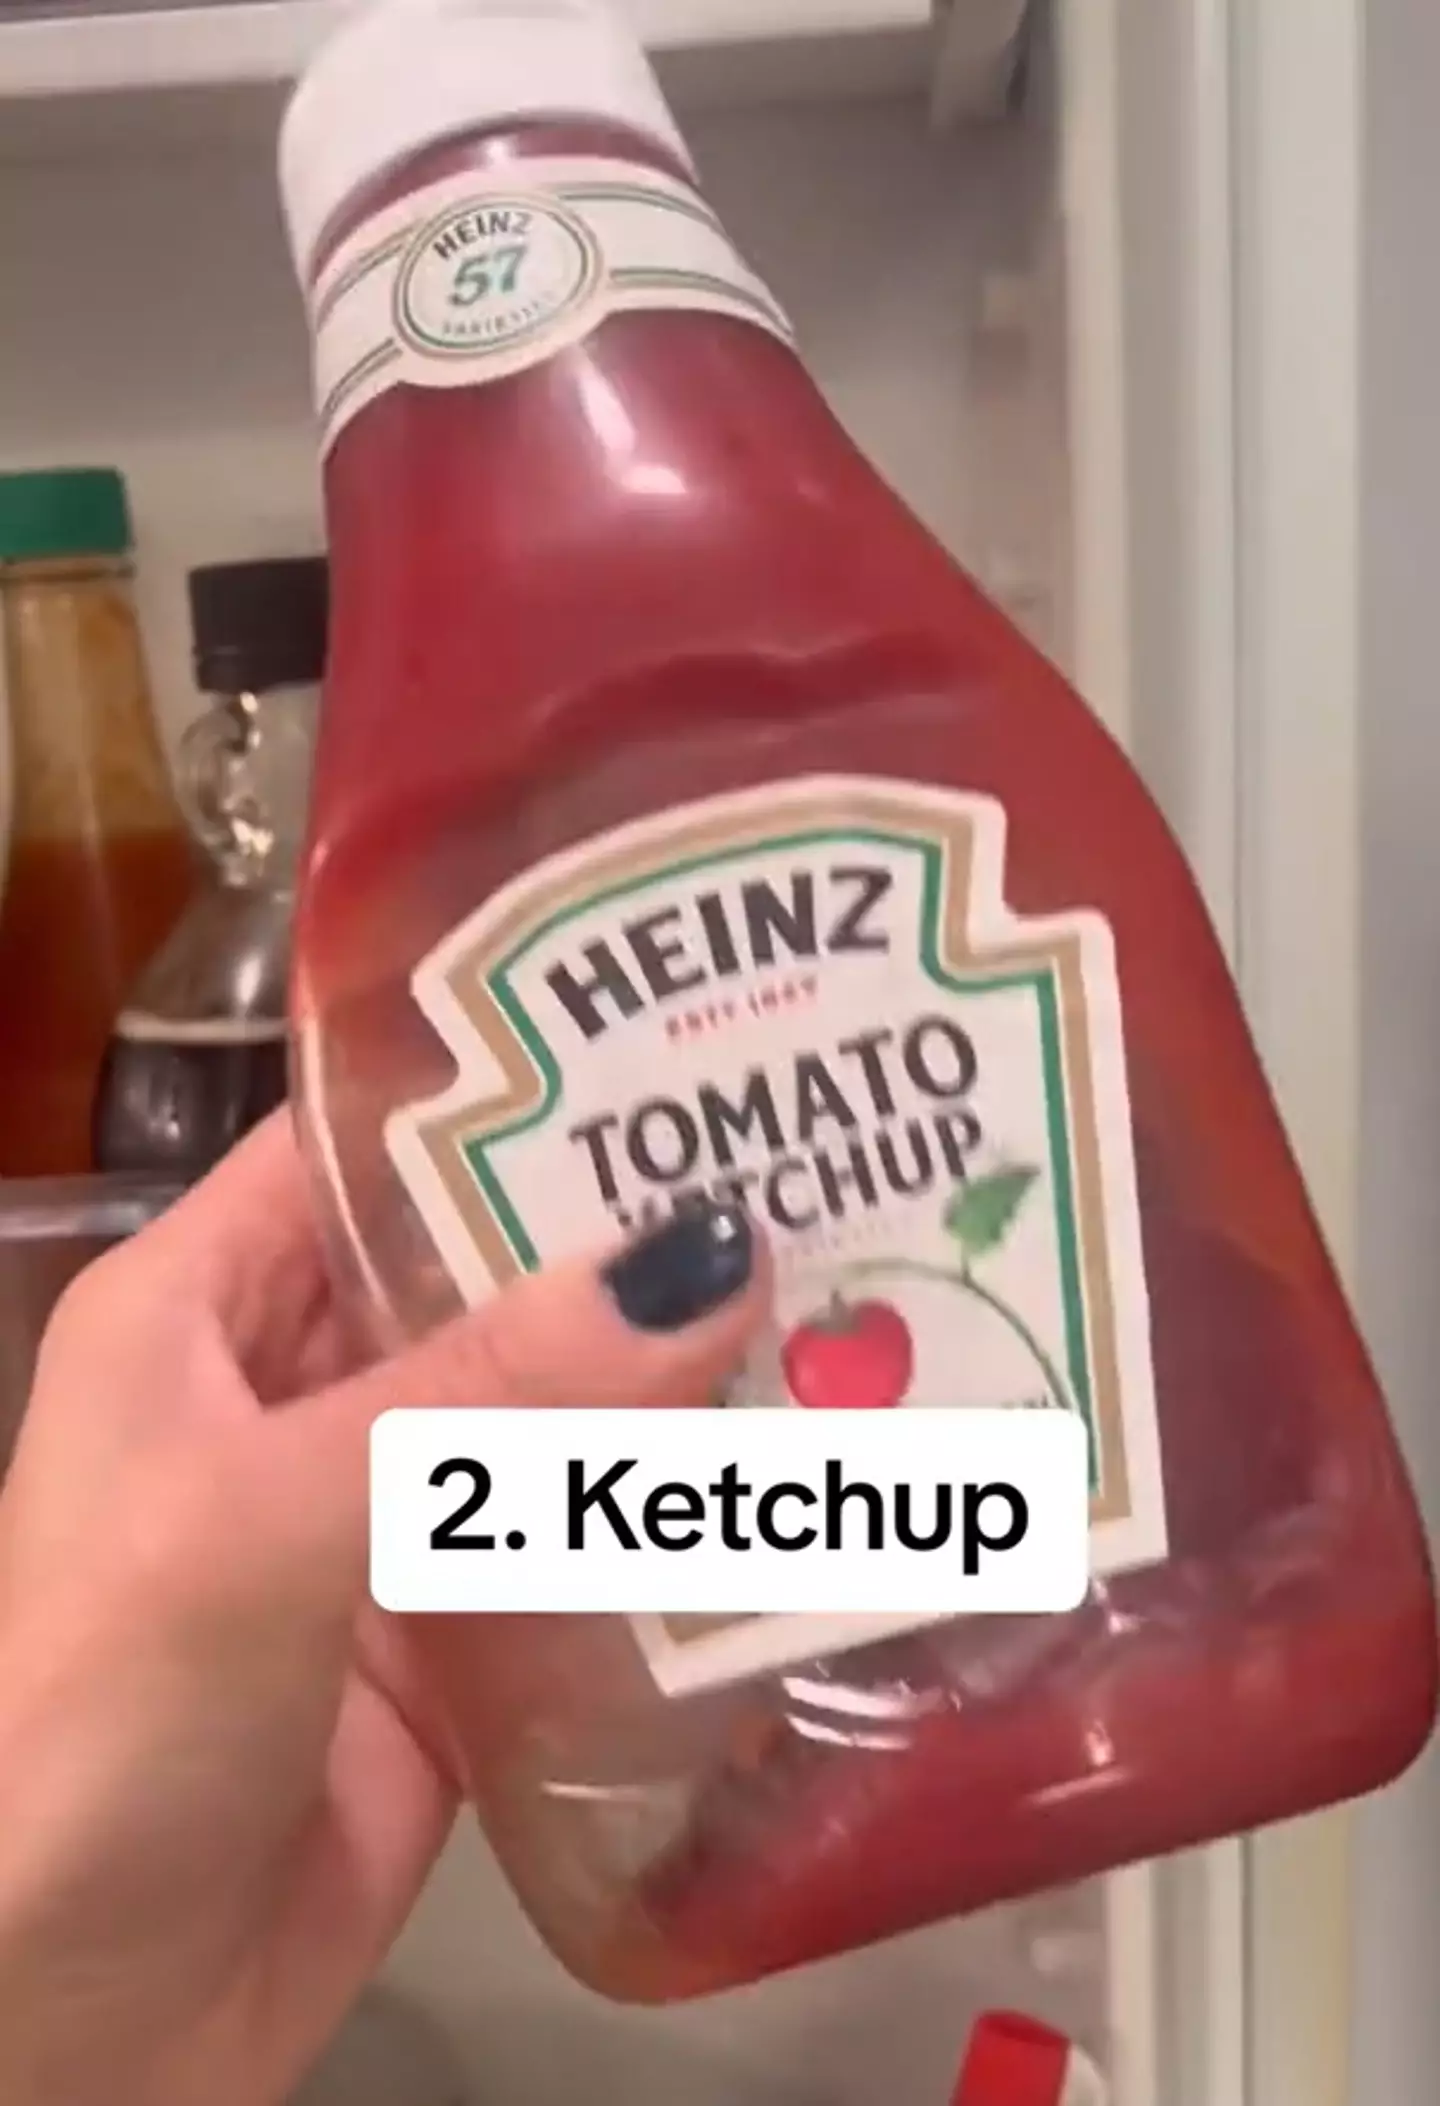 Ketchup is one of those you actually can keep in the fridge just fine, and most people agree.